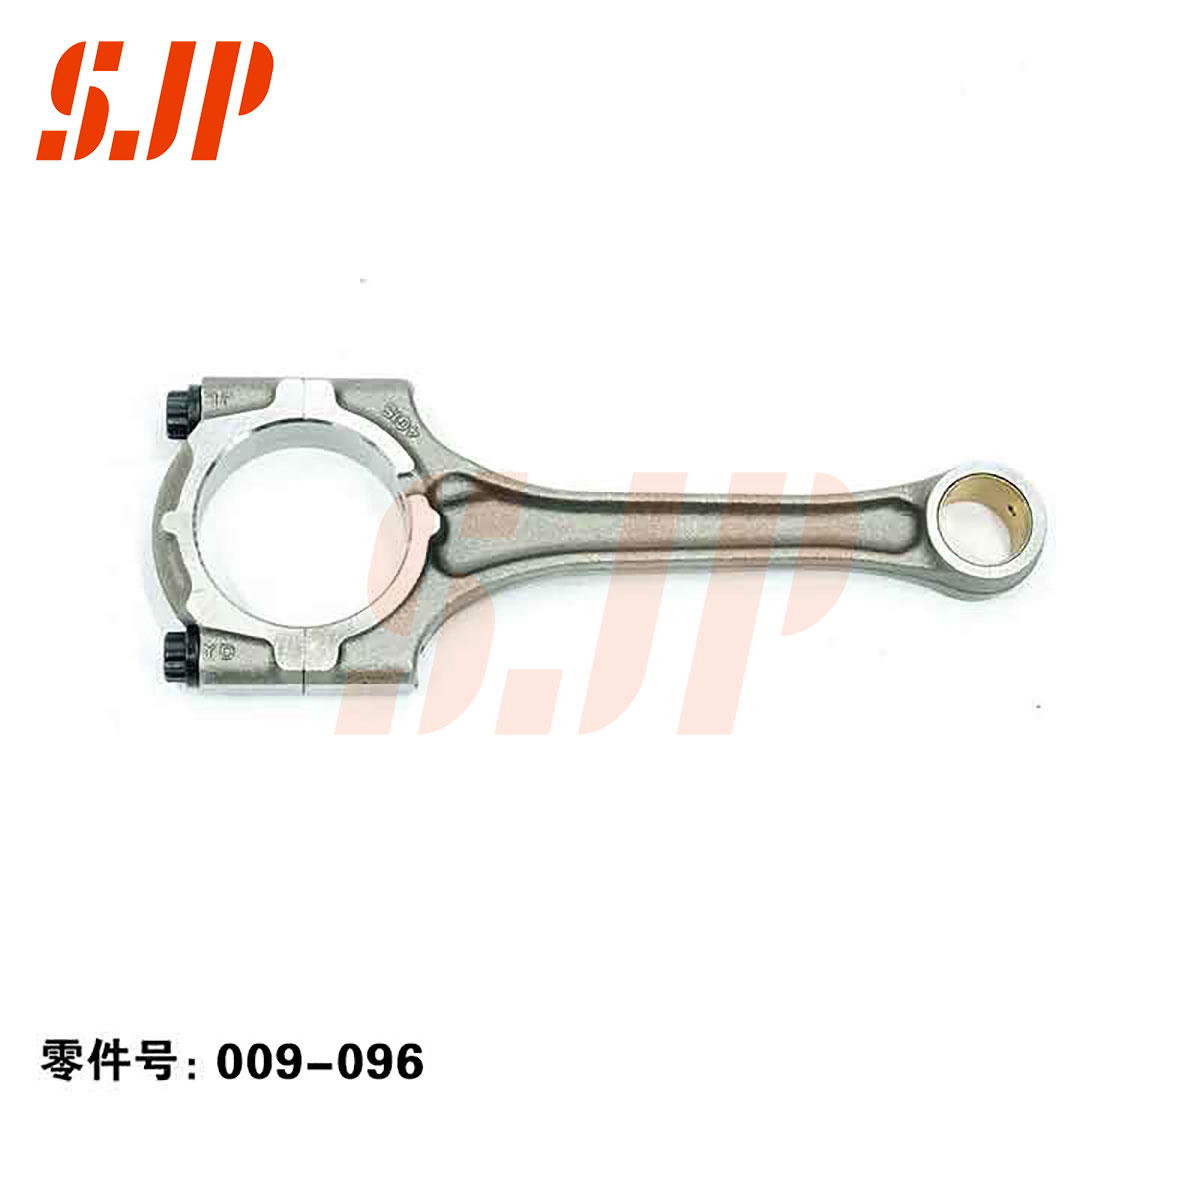 SJ-009-096 Connecting Rod For Geely 4G15CVVT